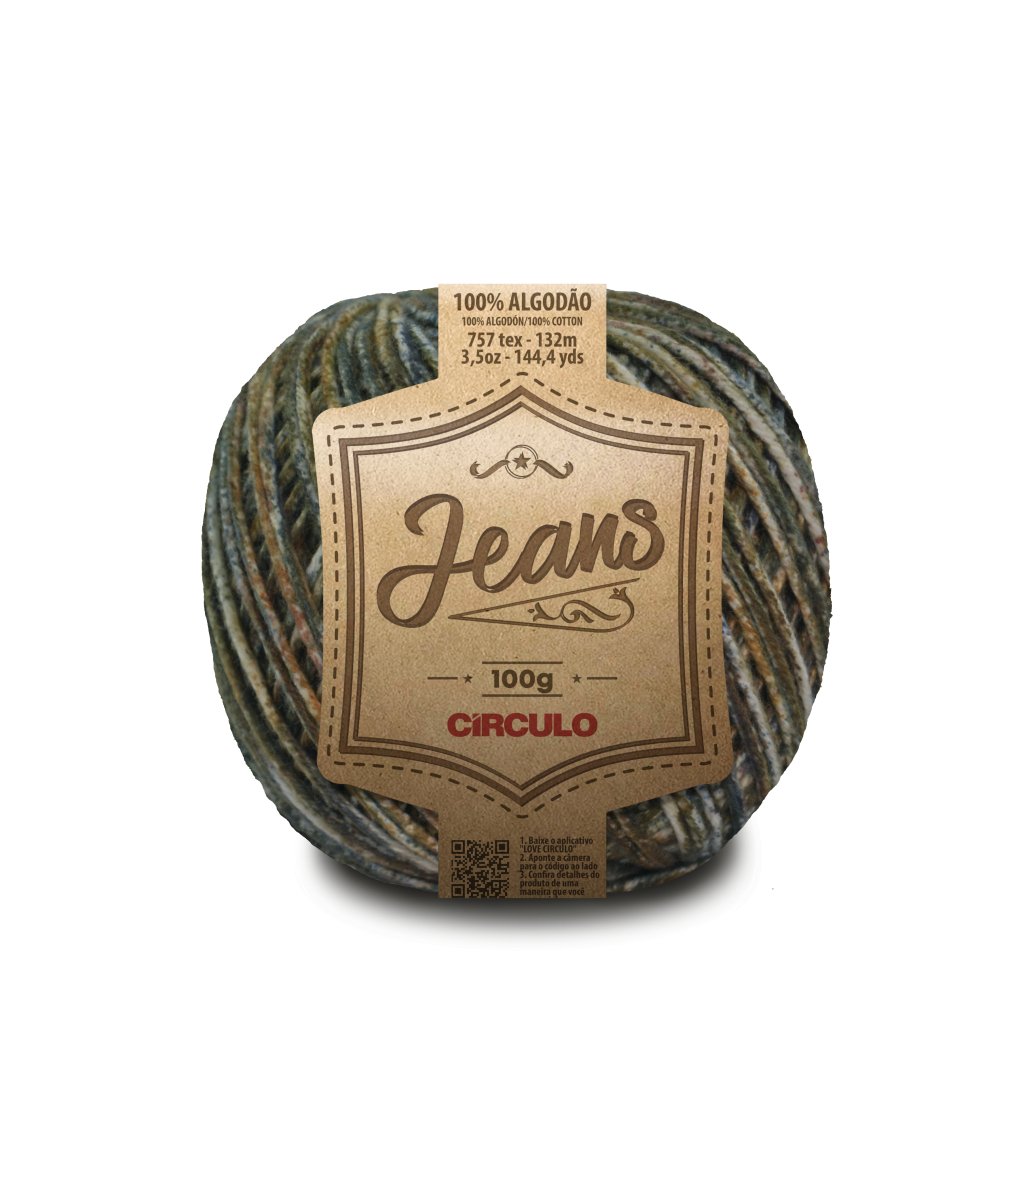 Circulo JEANS 100% Cotton yarn 132m - 100g, Color Afrobeat (387851-9416)